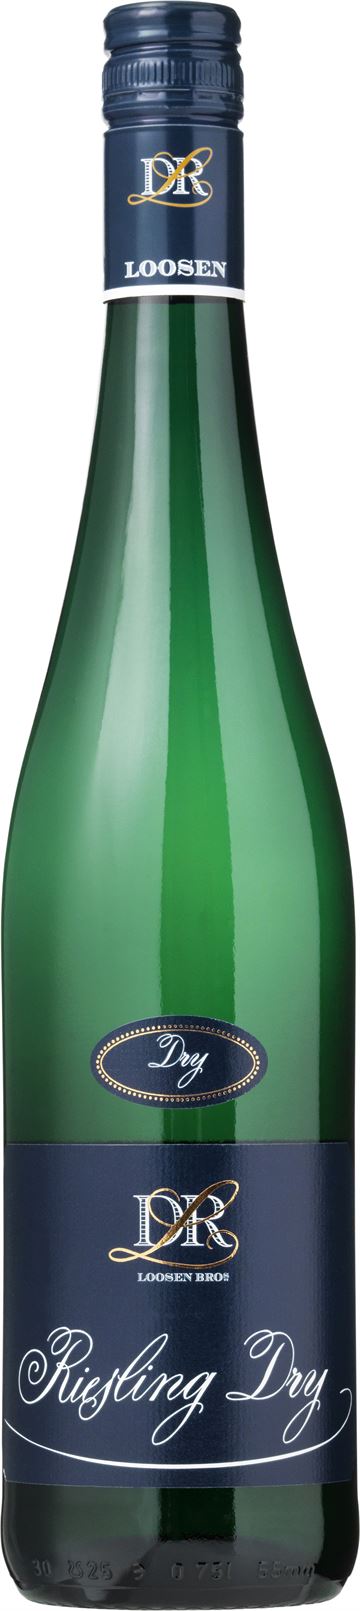 DR. LOOSEN RIESLING  DRY